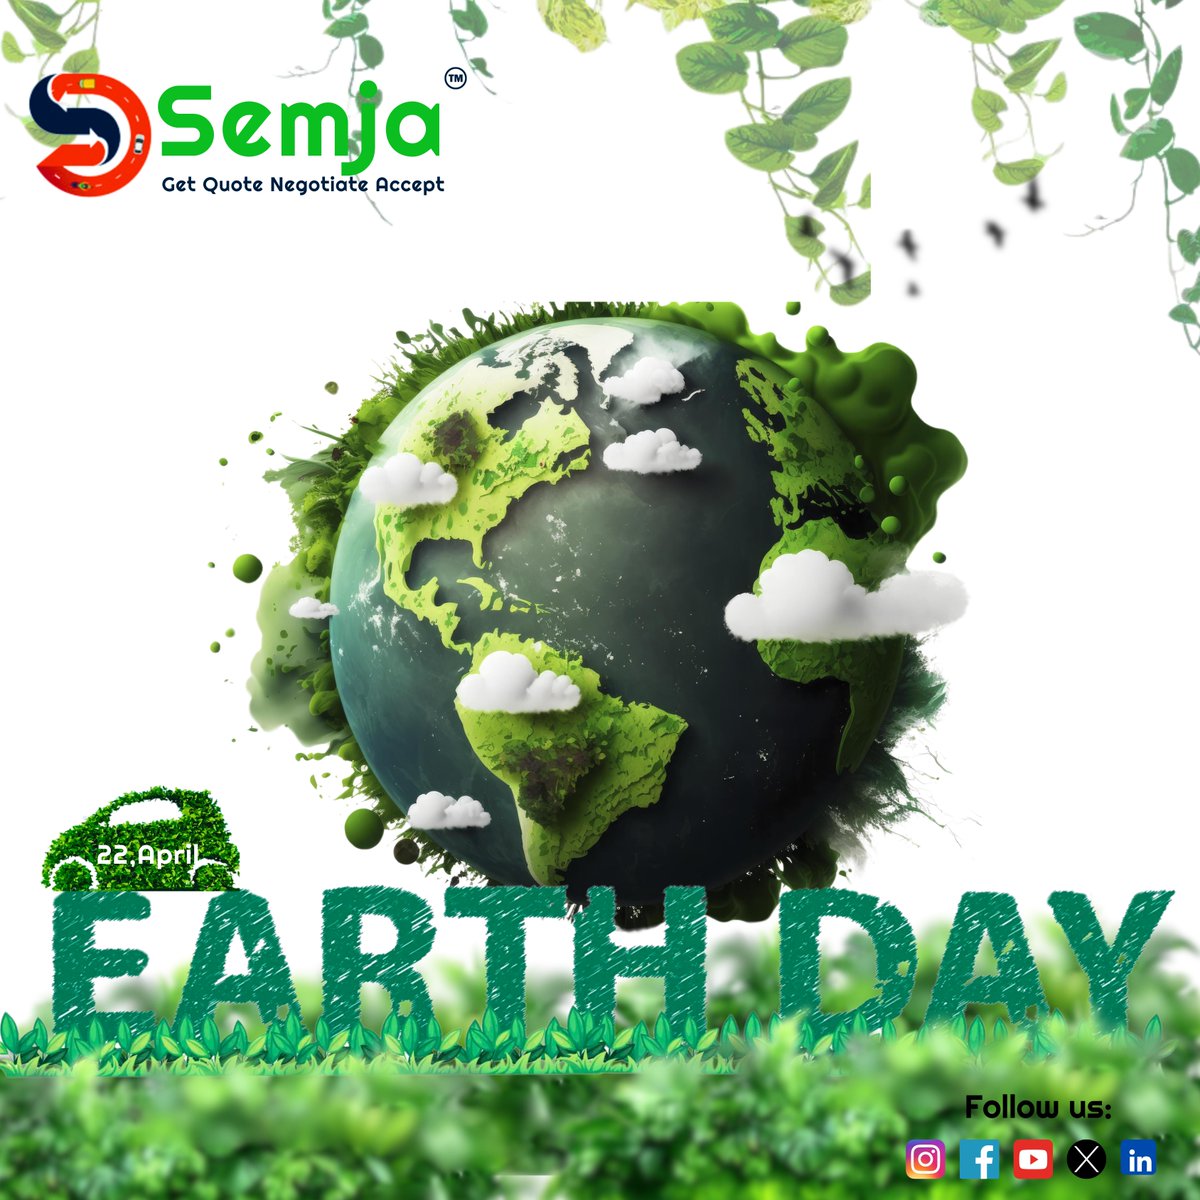 Let's celebrate by taking eco-friendly rides with Semja. Together, we can reduce our carbon footprint and contribute to a cleaner, greener planet. Negotiate fares directly with drivers and make every ride count towards a sustainable future.#GoGreen #SaveEarth #Semja #semjaapp